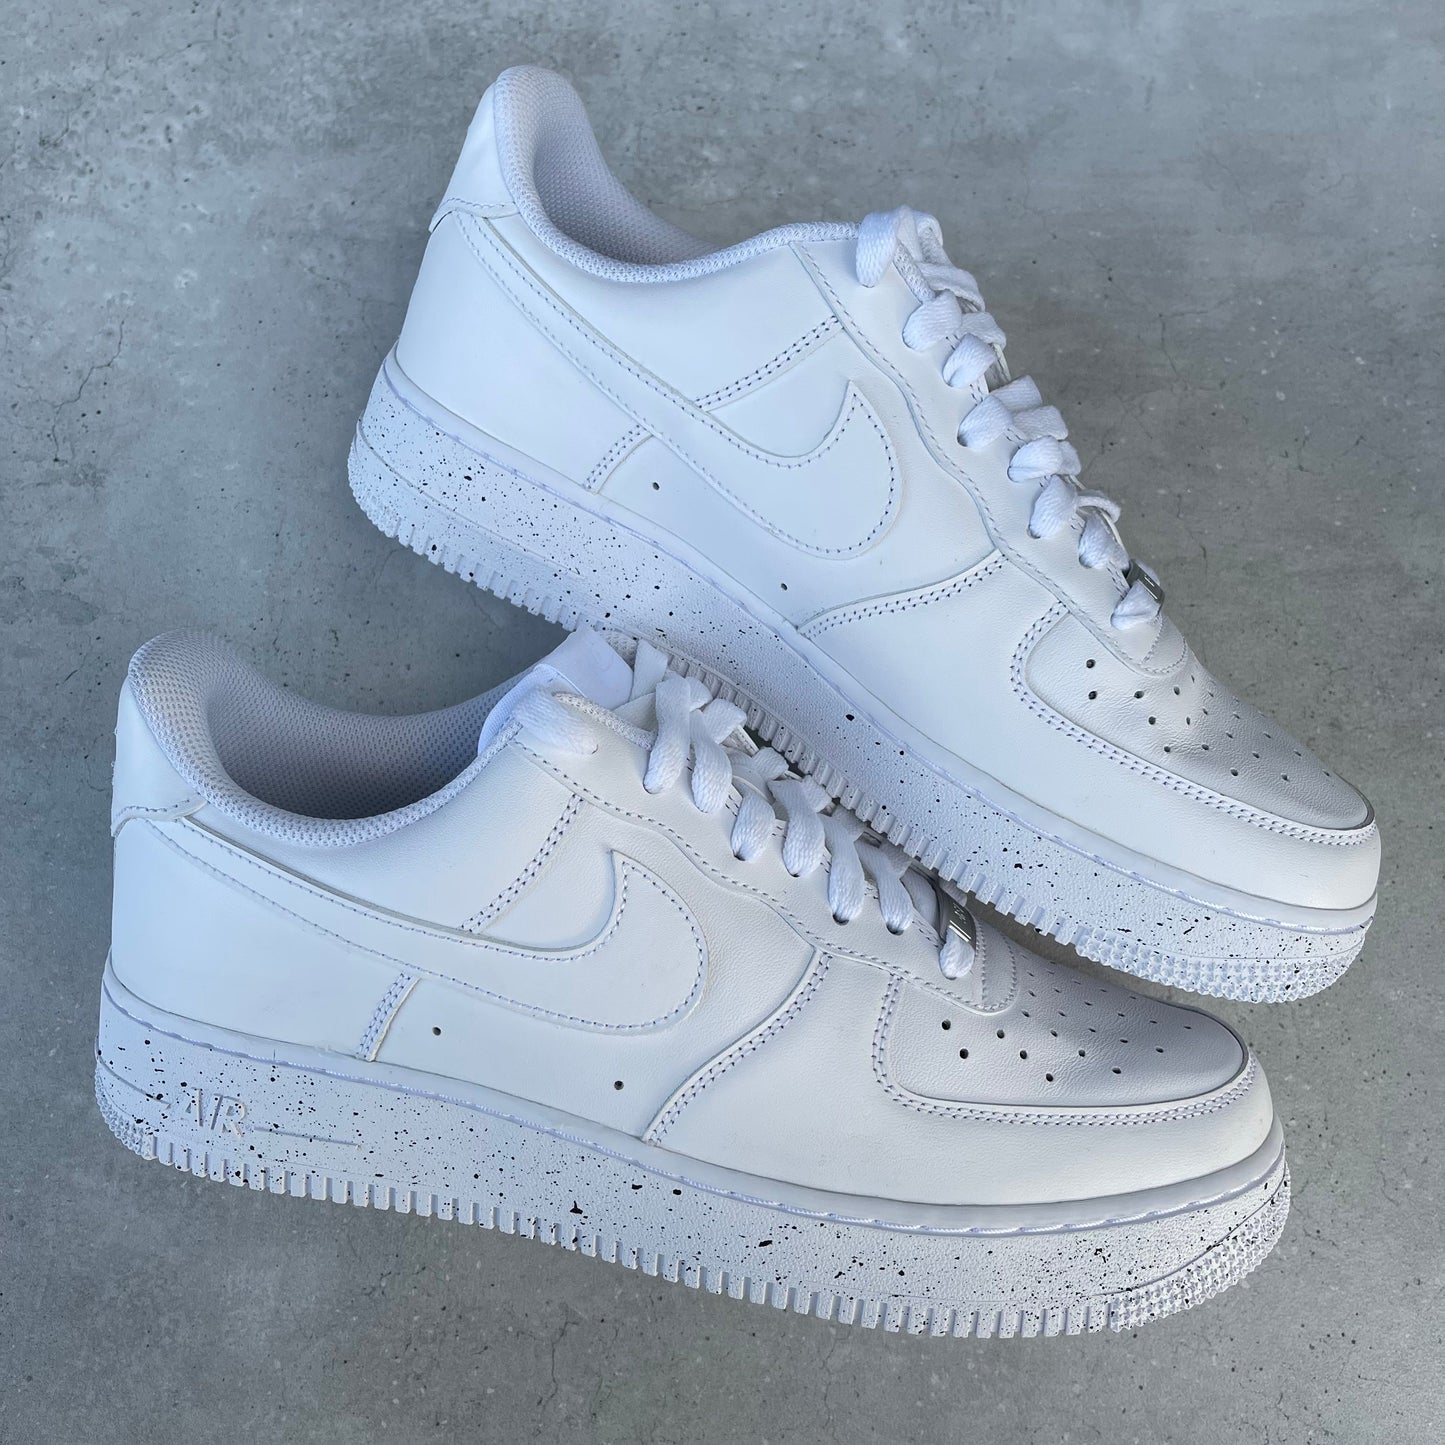 Custom AIR FORCE 1 - Small splash (soles only)